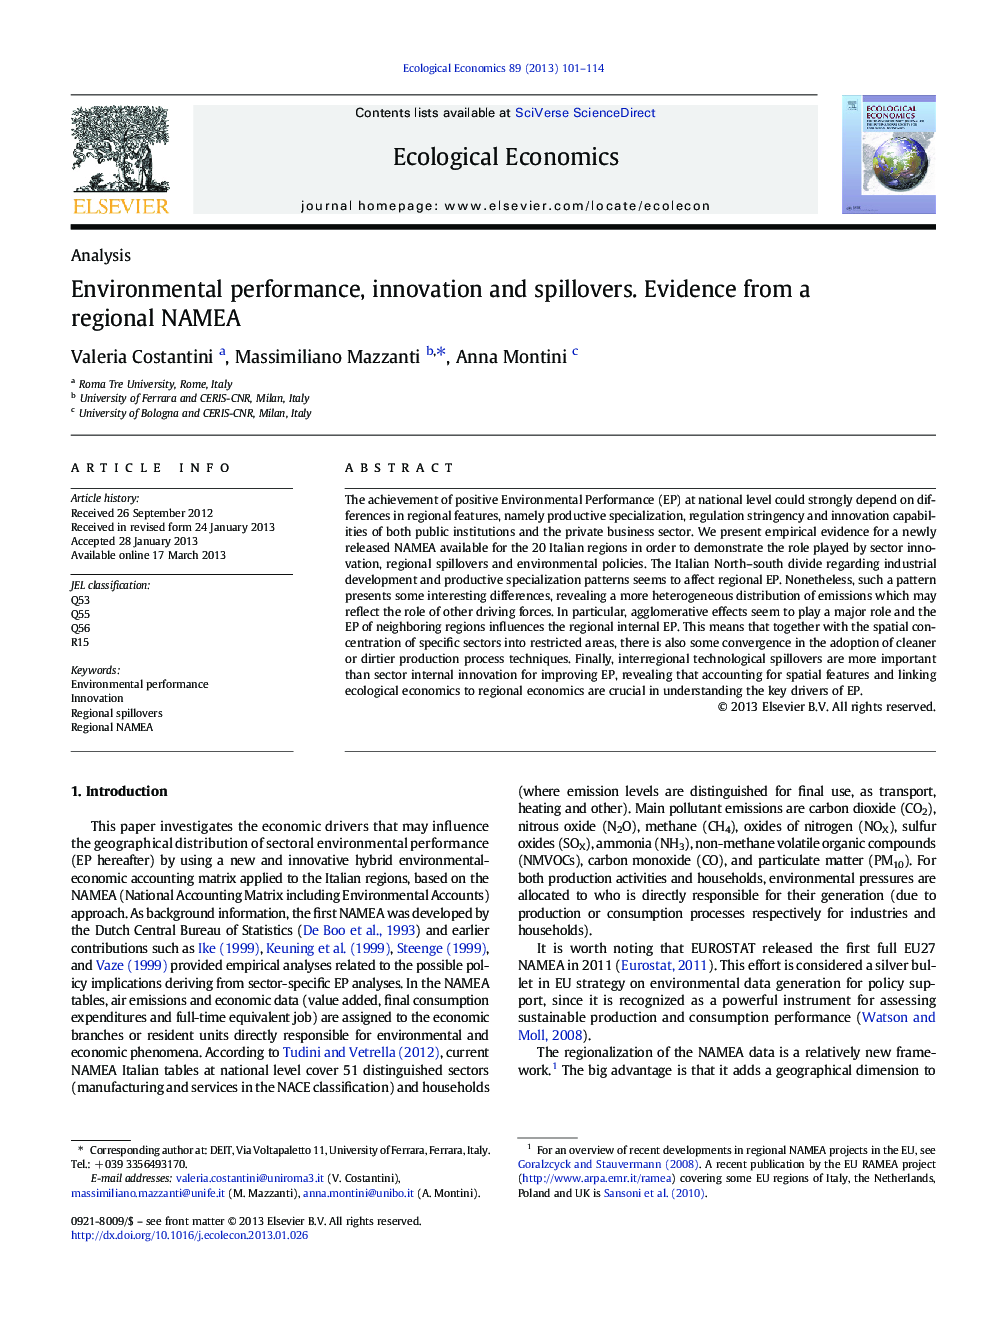 AnalysisEnvironmental performance, innovation and spillovers. Evidence from a regional NAMEA